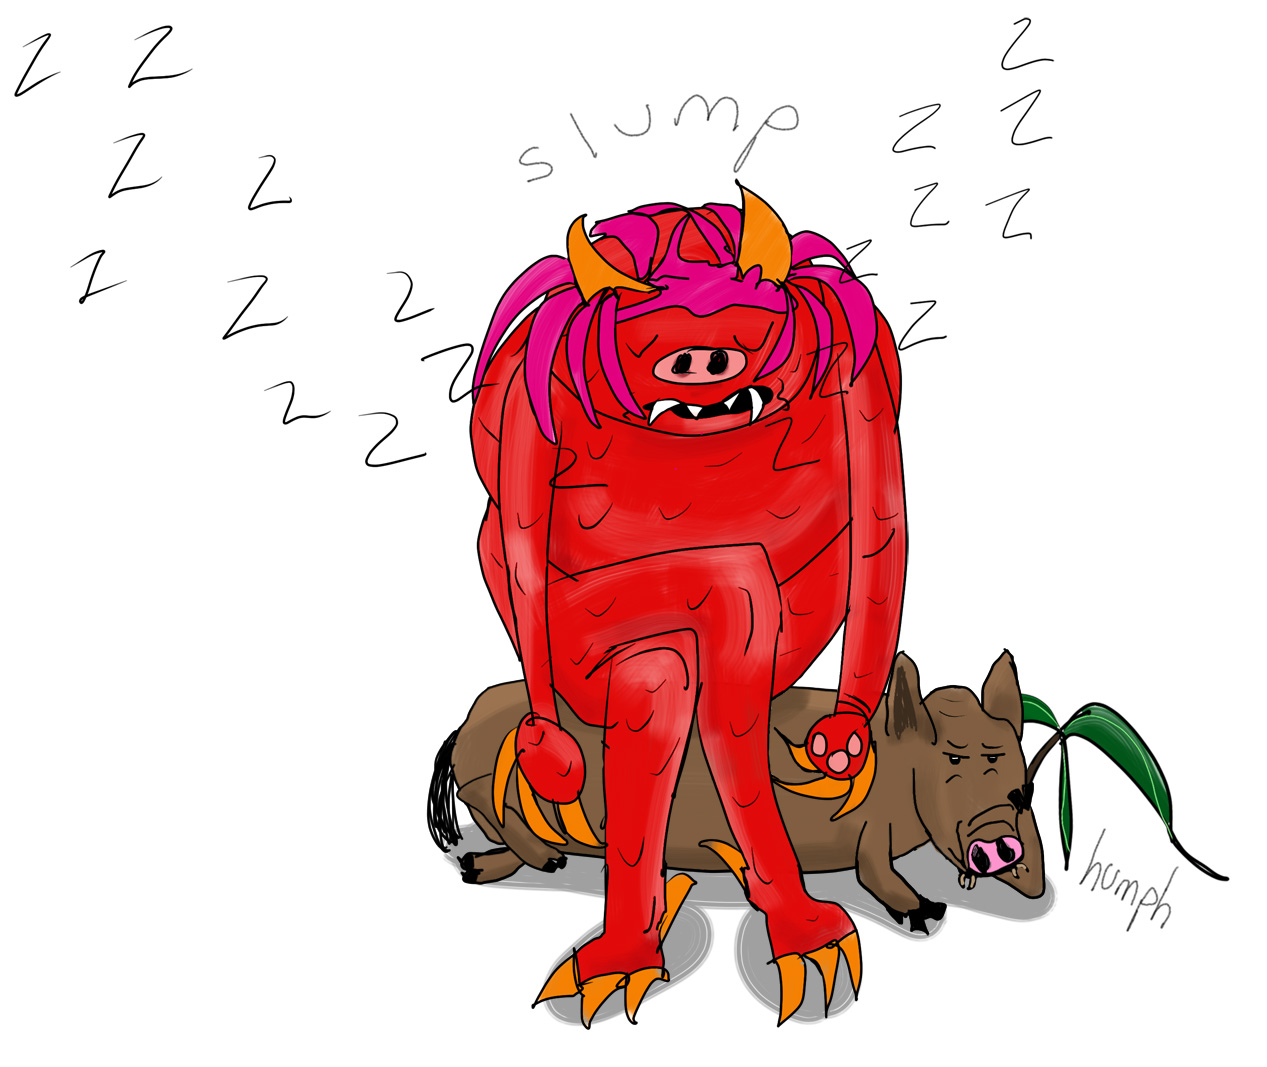 A red monster with yellow horns sleeps while sitting on a frustrated boar.